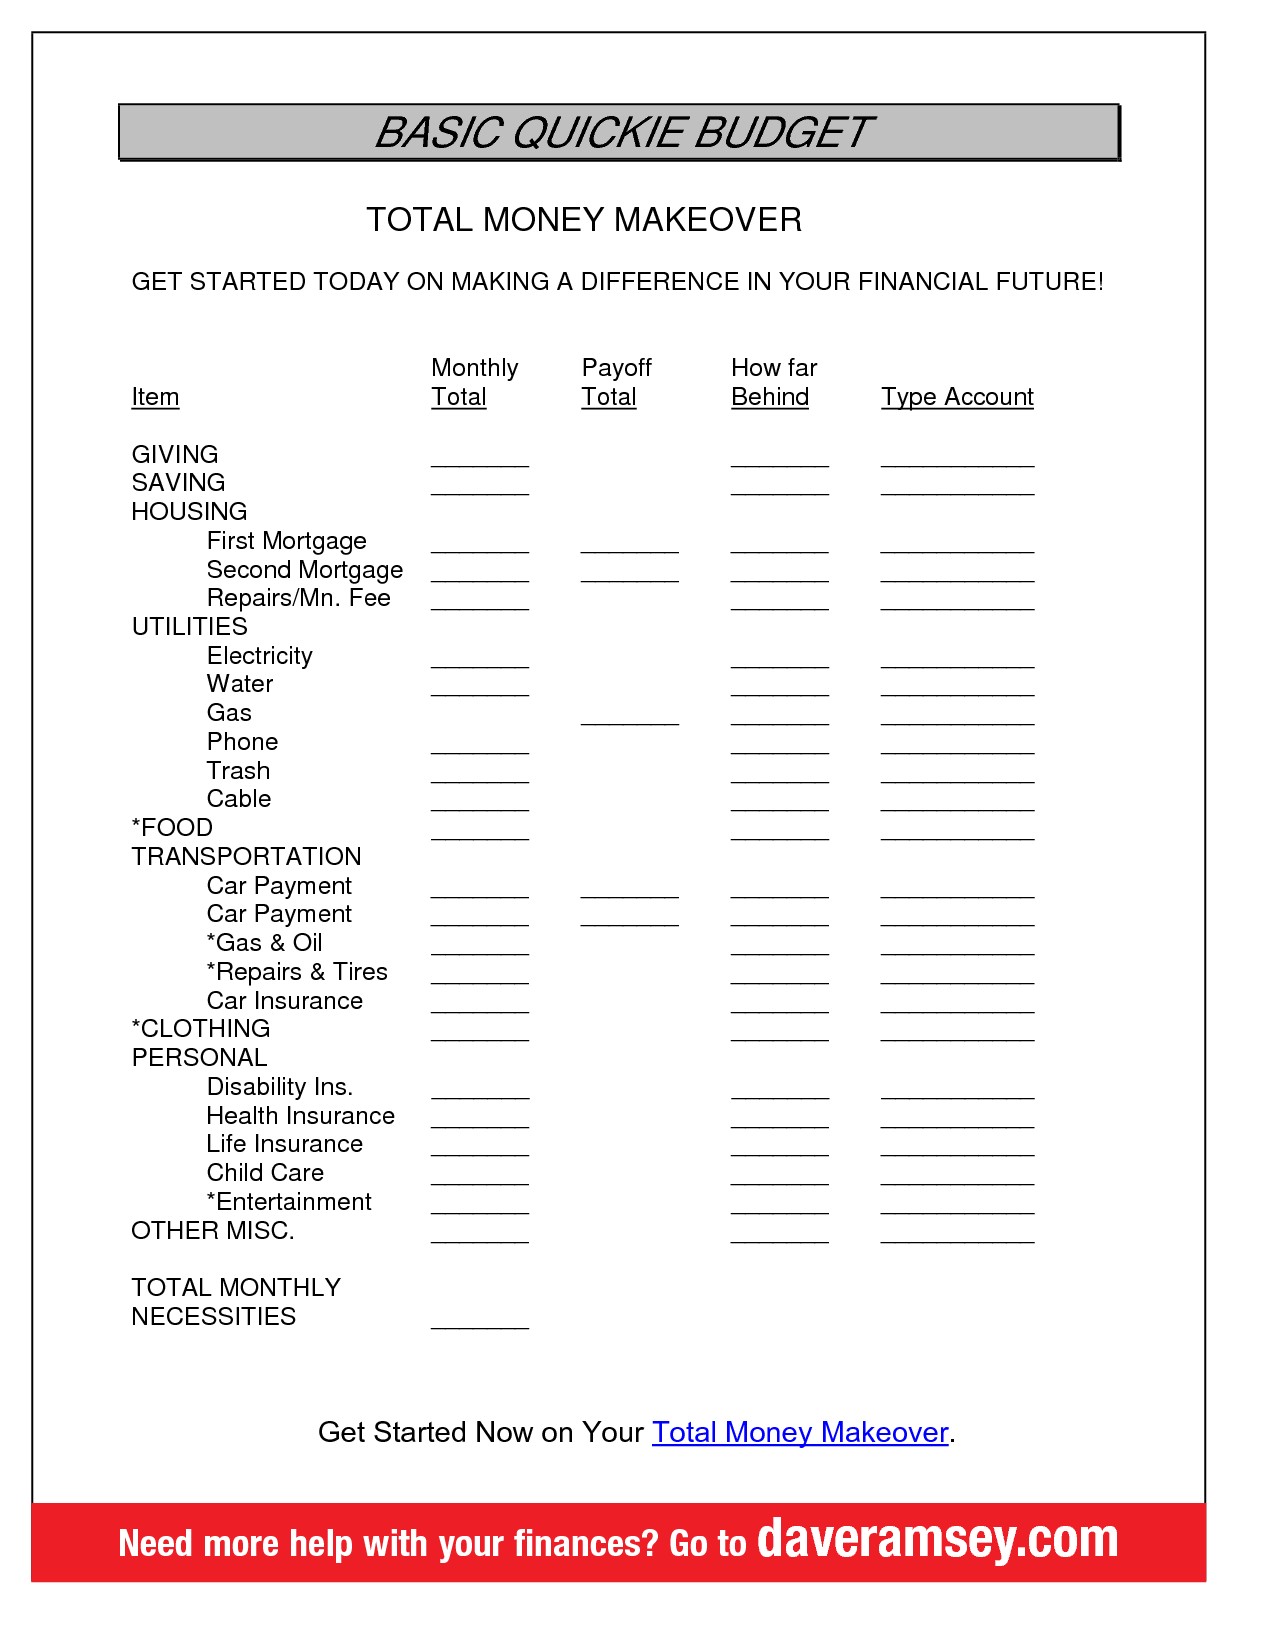 Dave Ramsey Budget Template BASIC QUICKIE BUDGET TOTAL Biblical Document Form Pdf